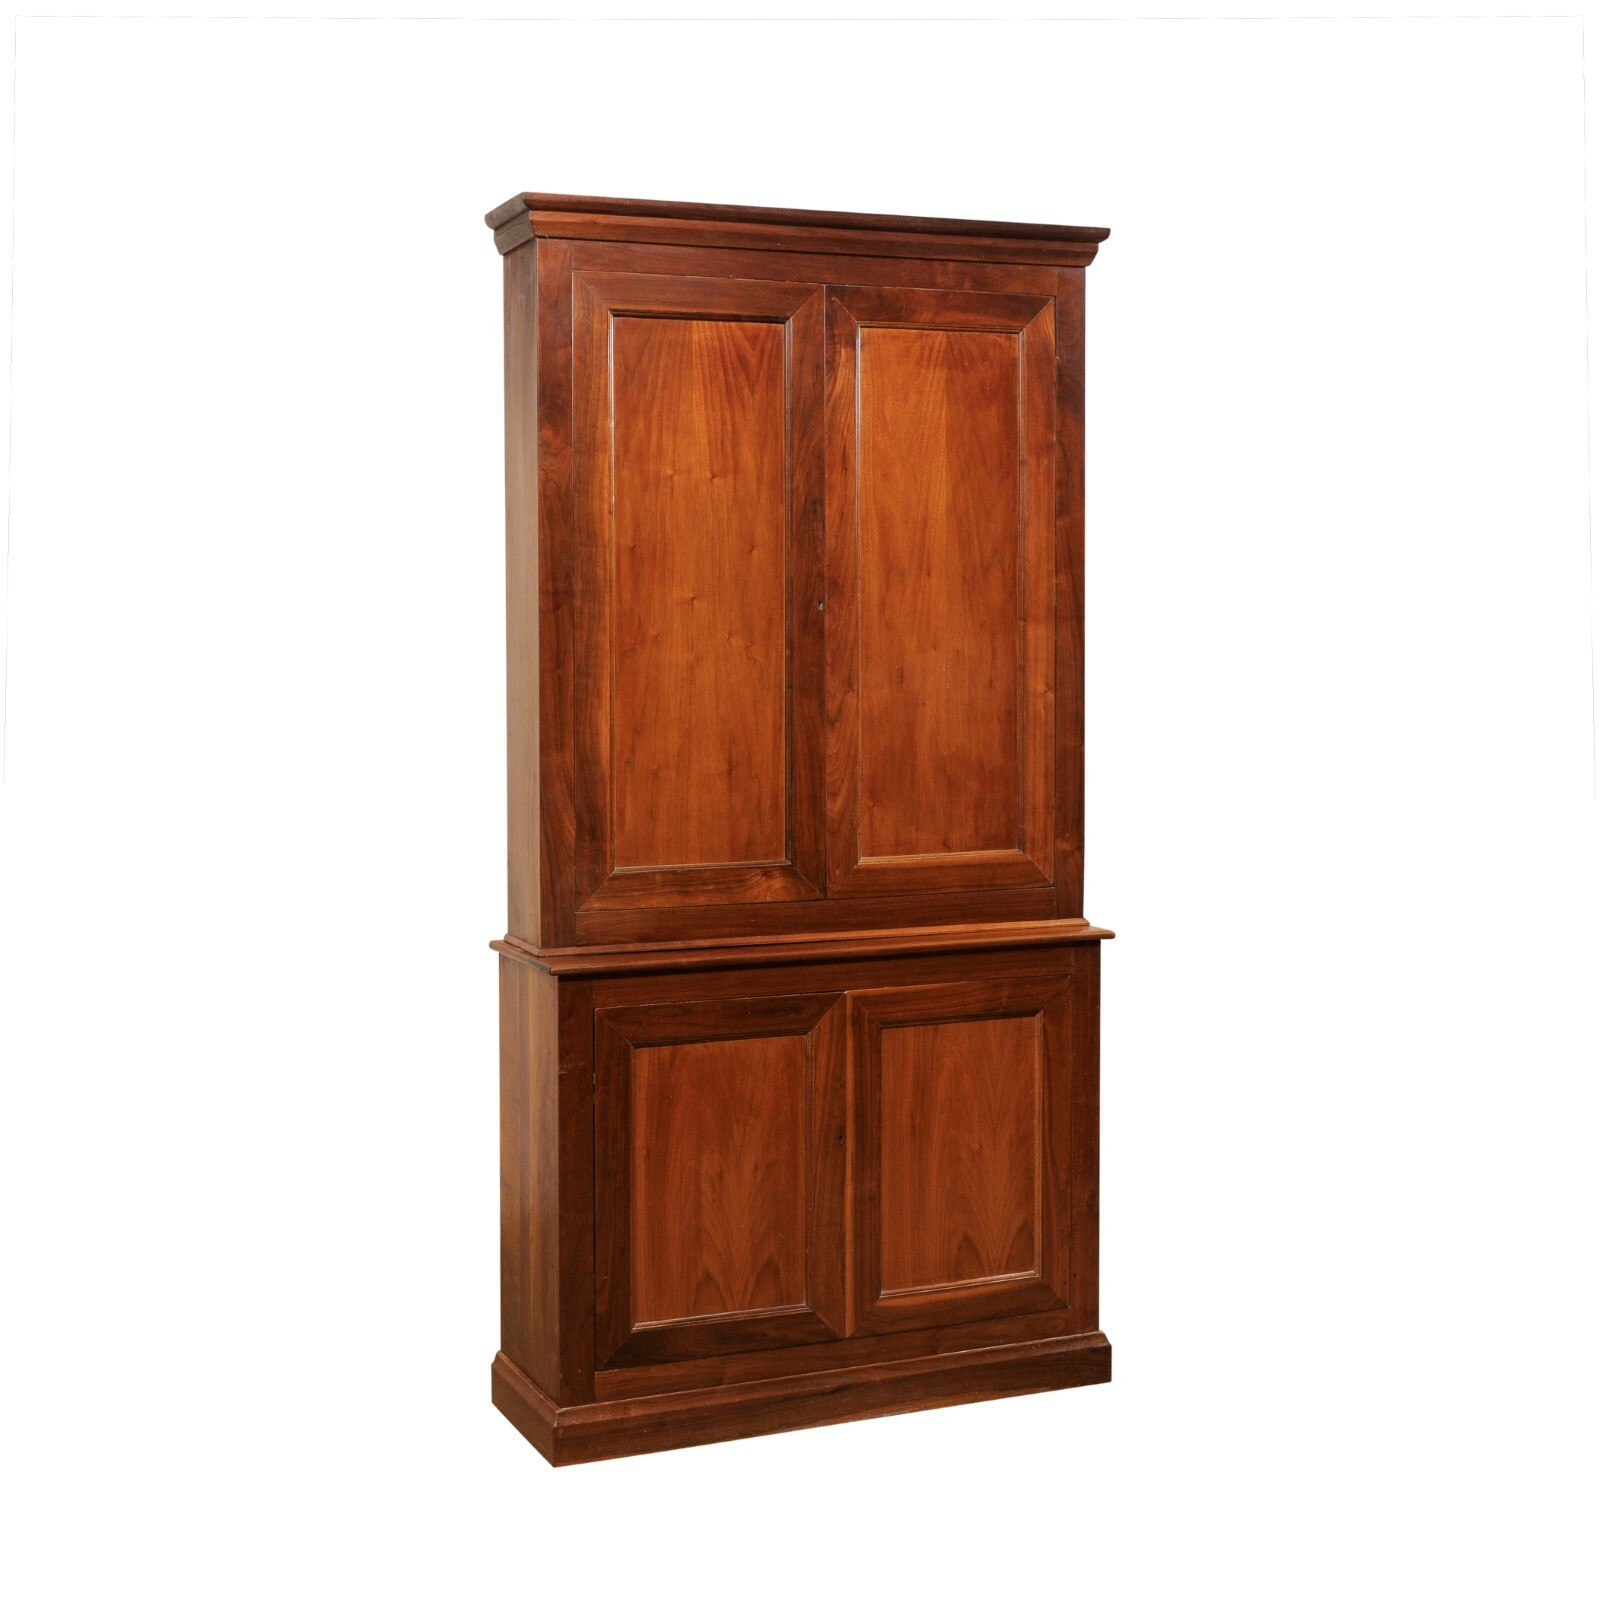 French Cherry Wood Tall Cabinet, Mid 20th c